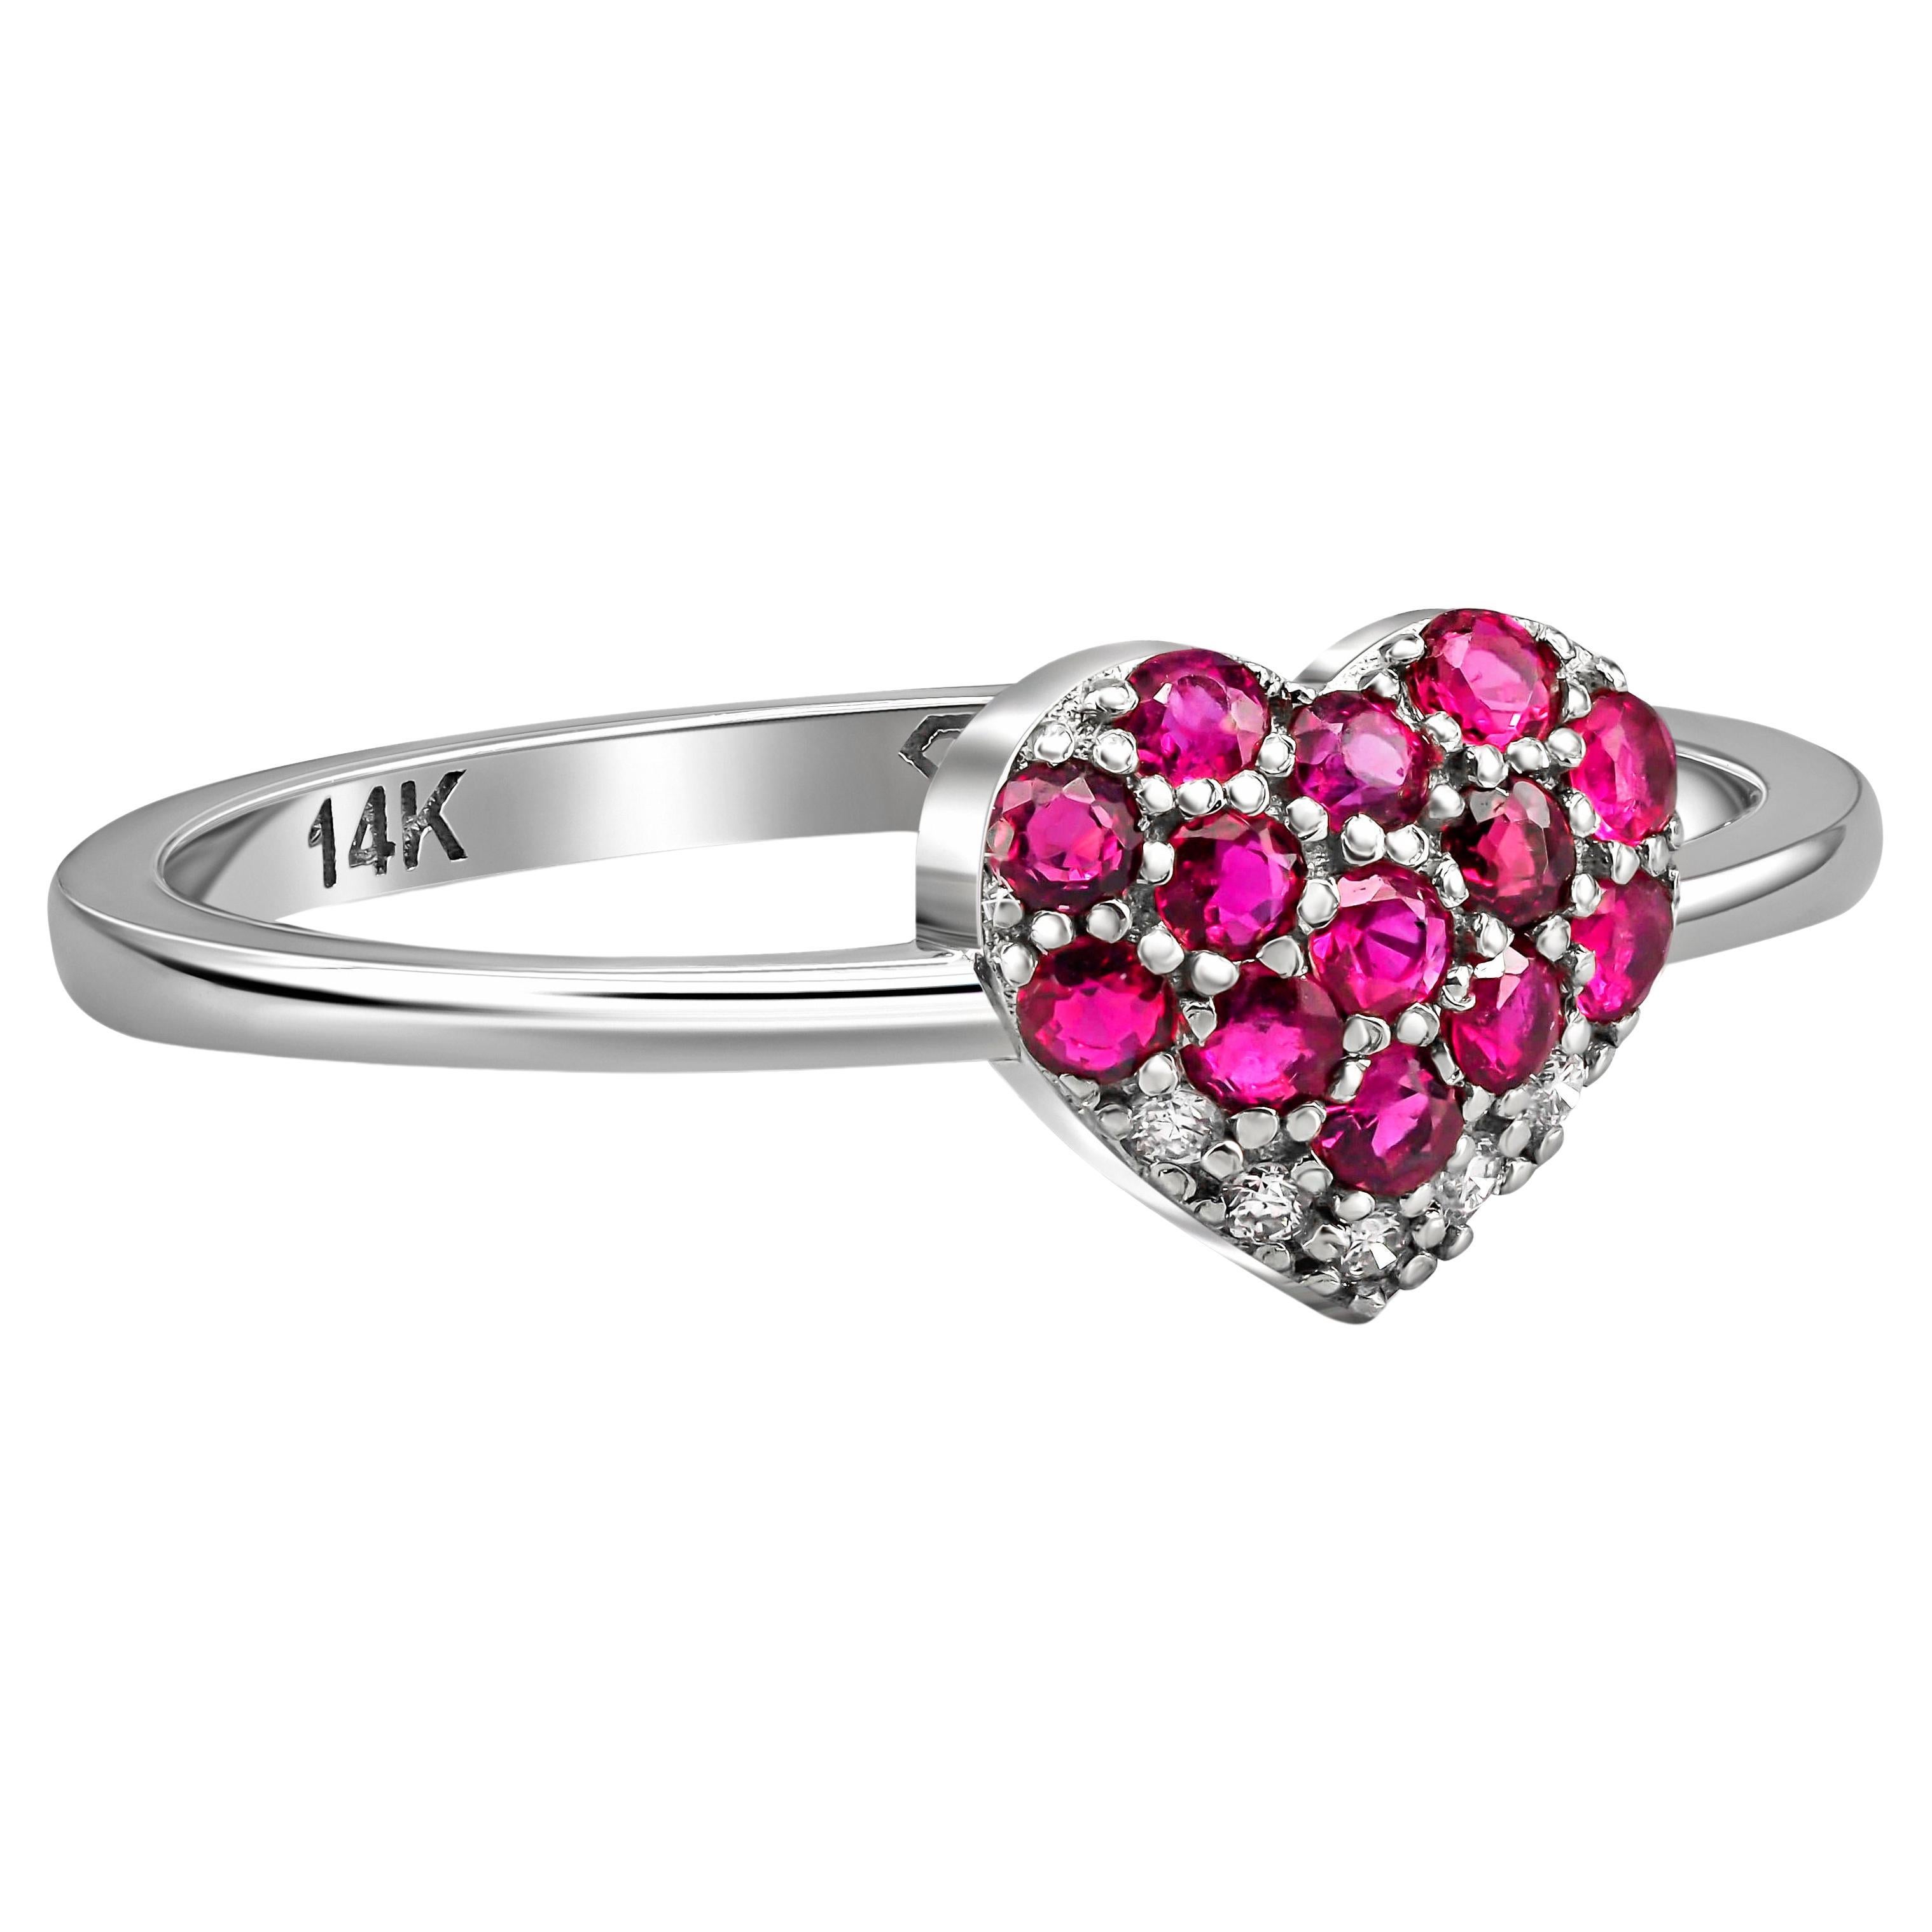 Heart shaped ruby ring. 